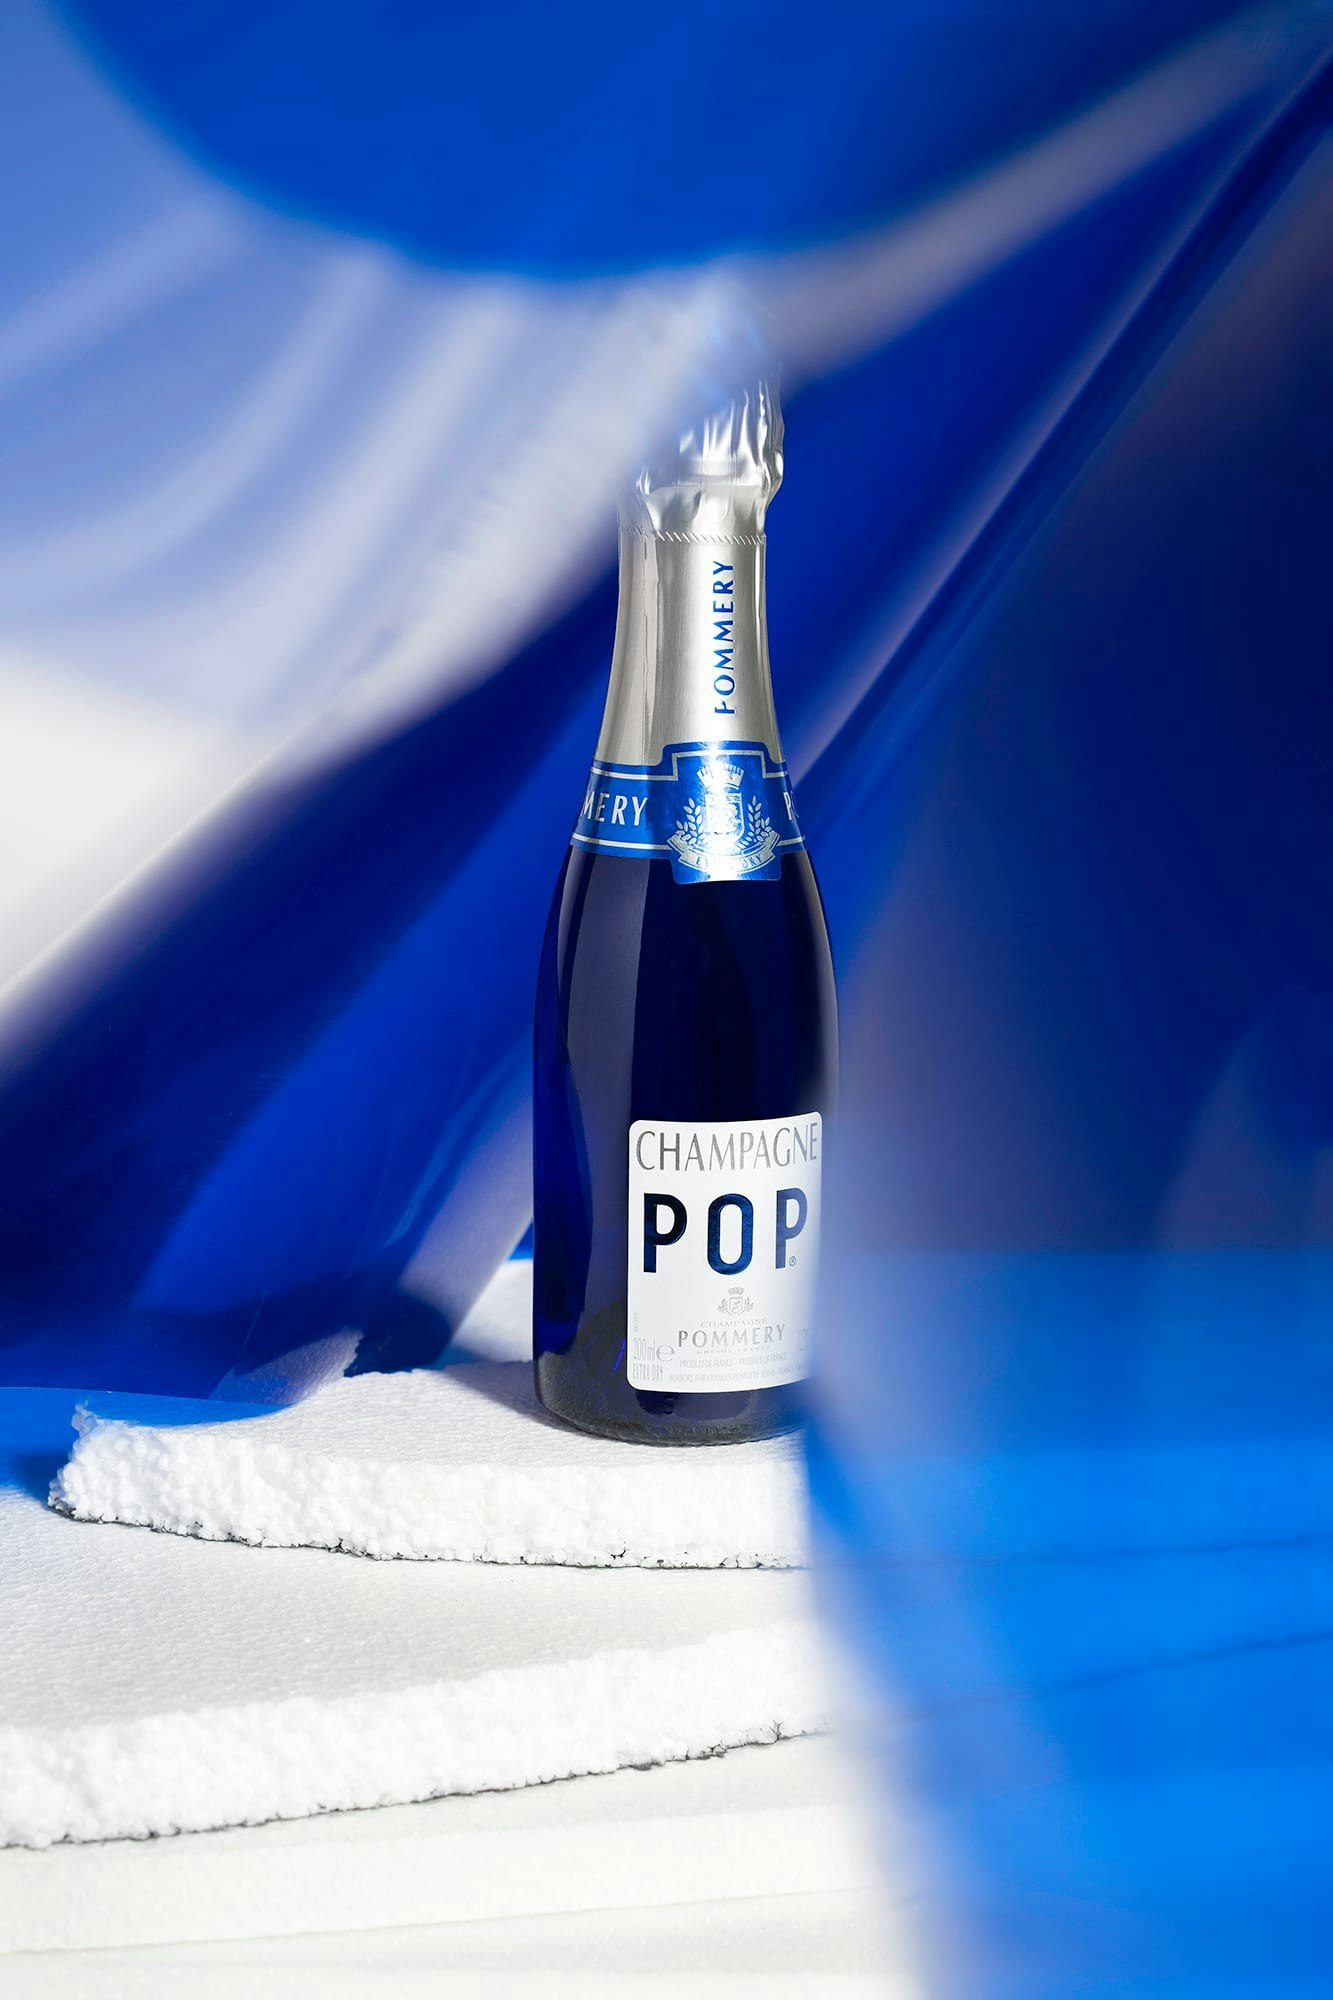 Bottle of Pommery Pop 20cl one white and blue font